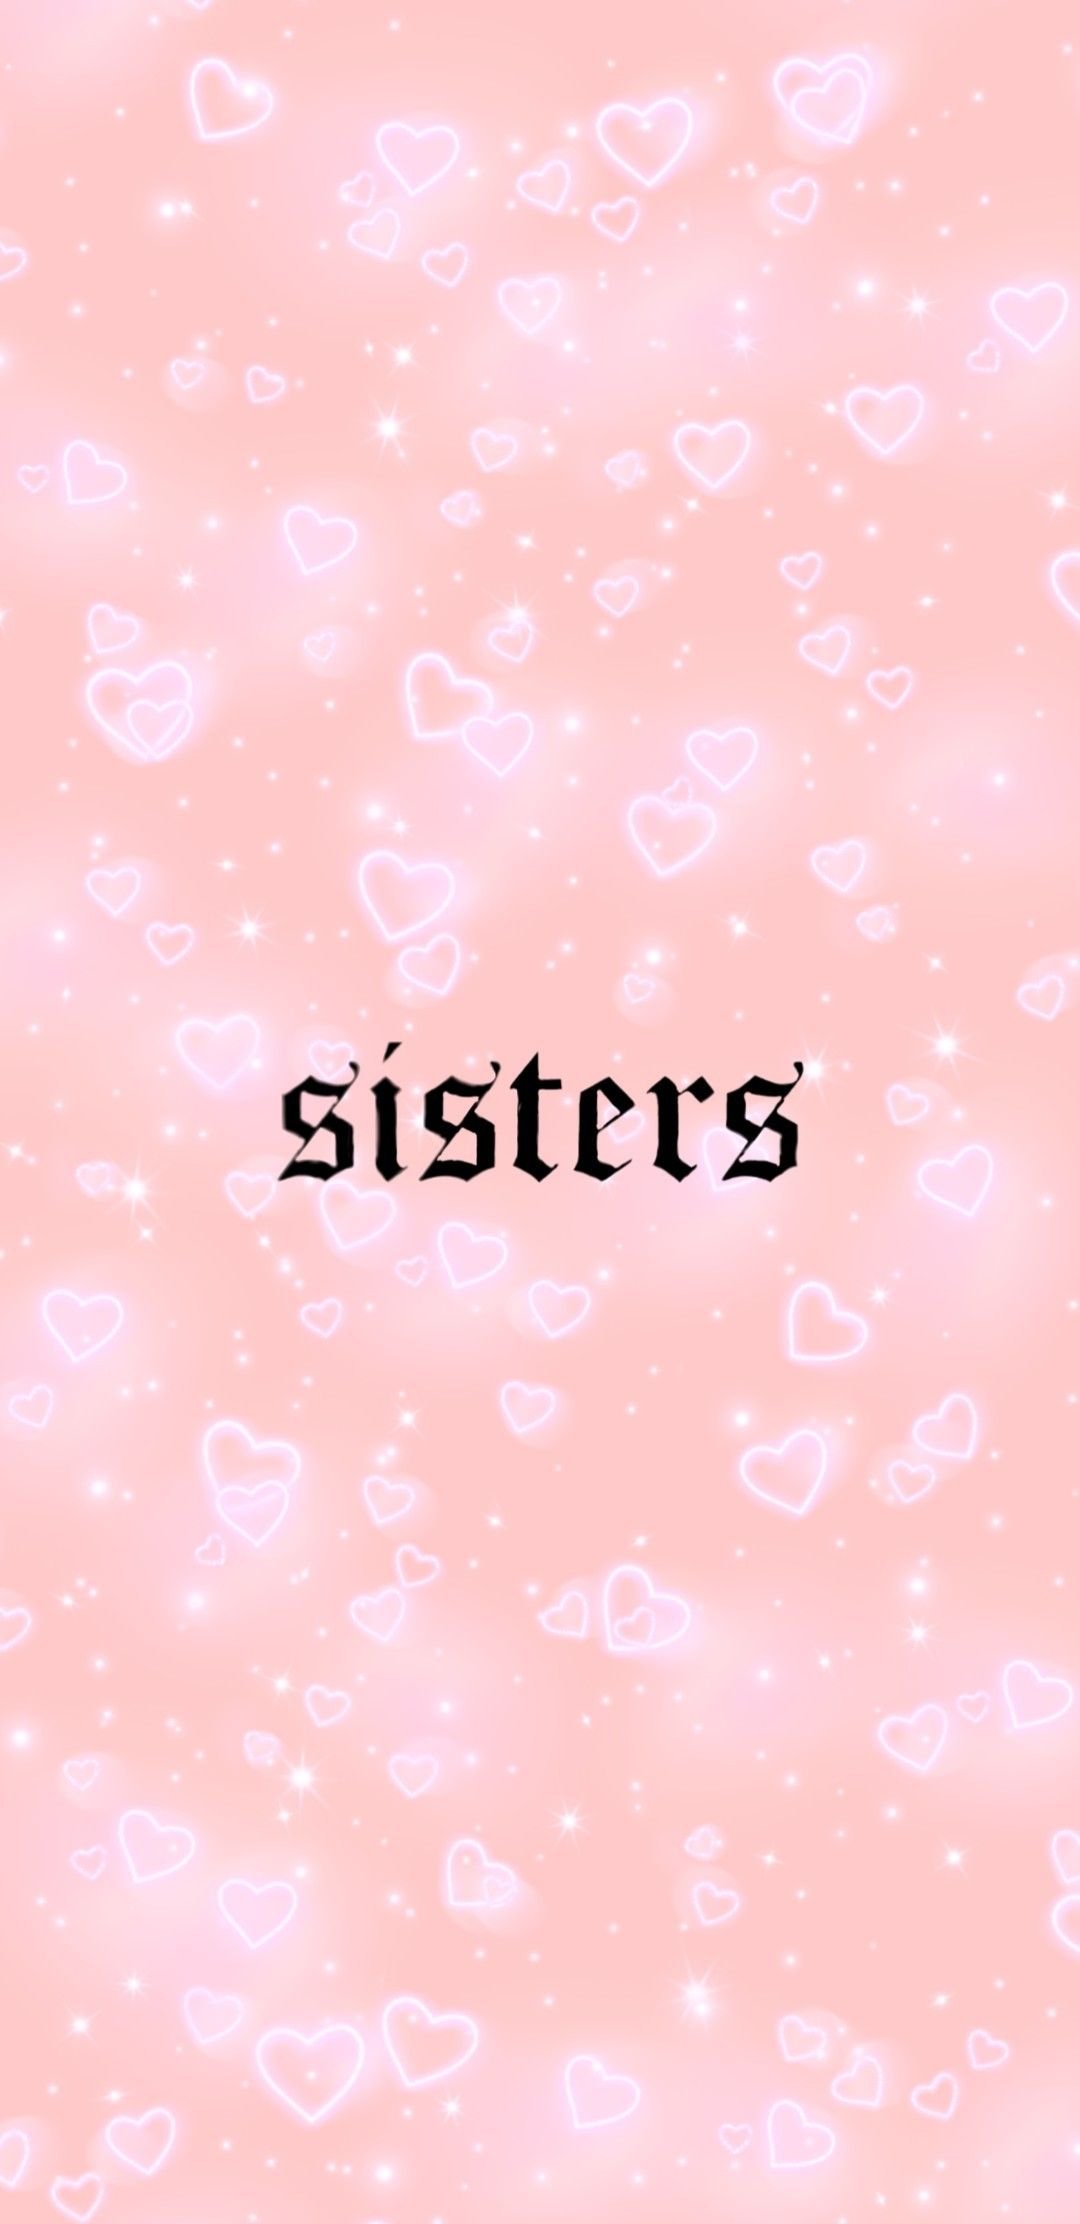 Aesthetic Sisters Wallpaper Download Mobcup